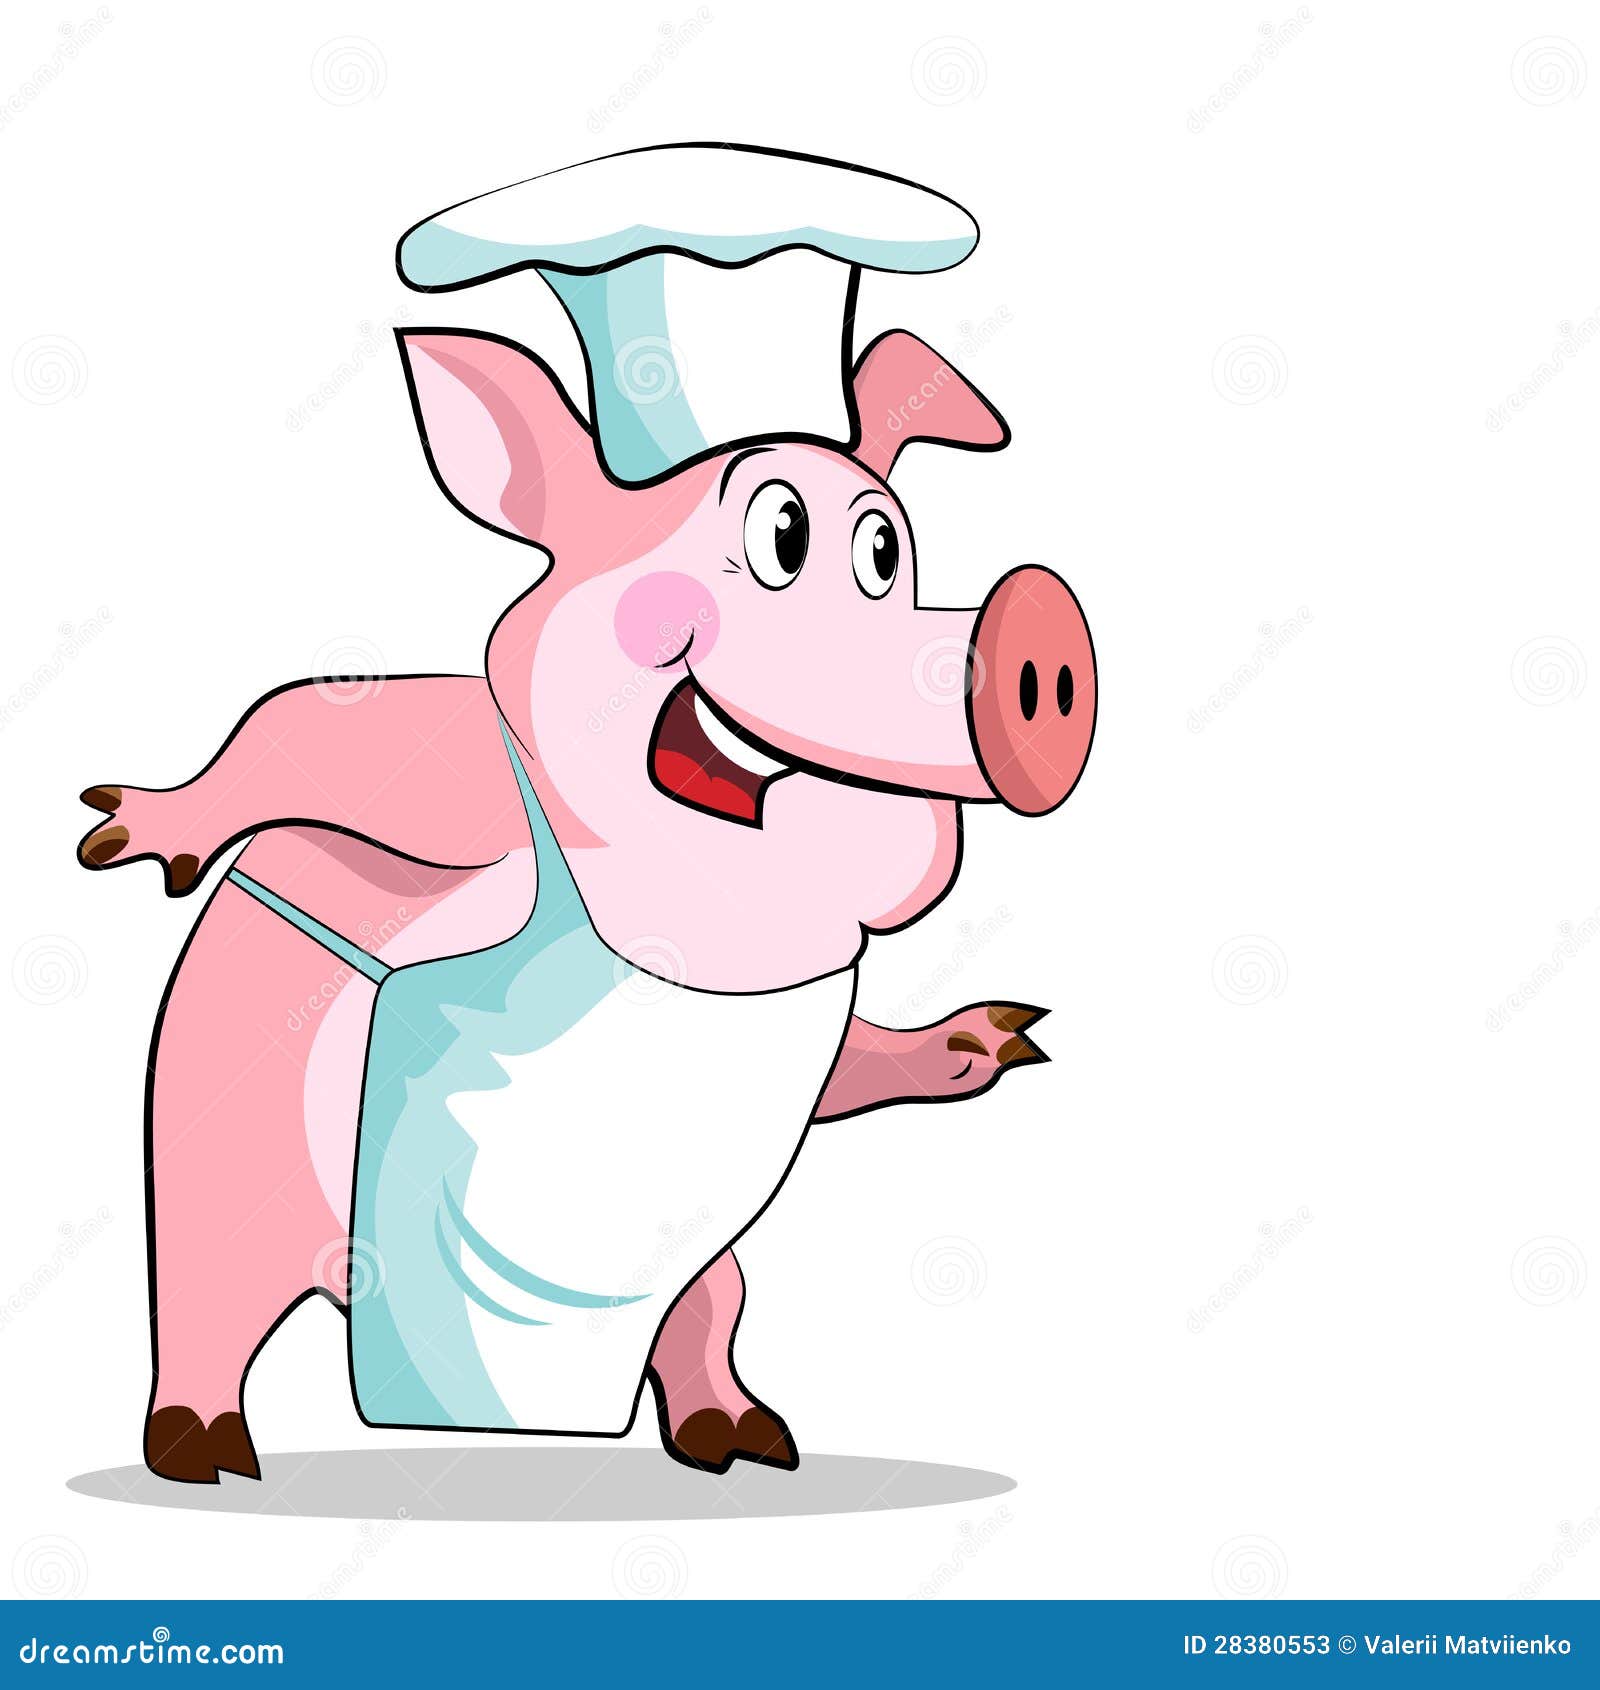 clipart pig cooking - photo #4